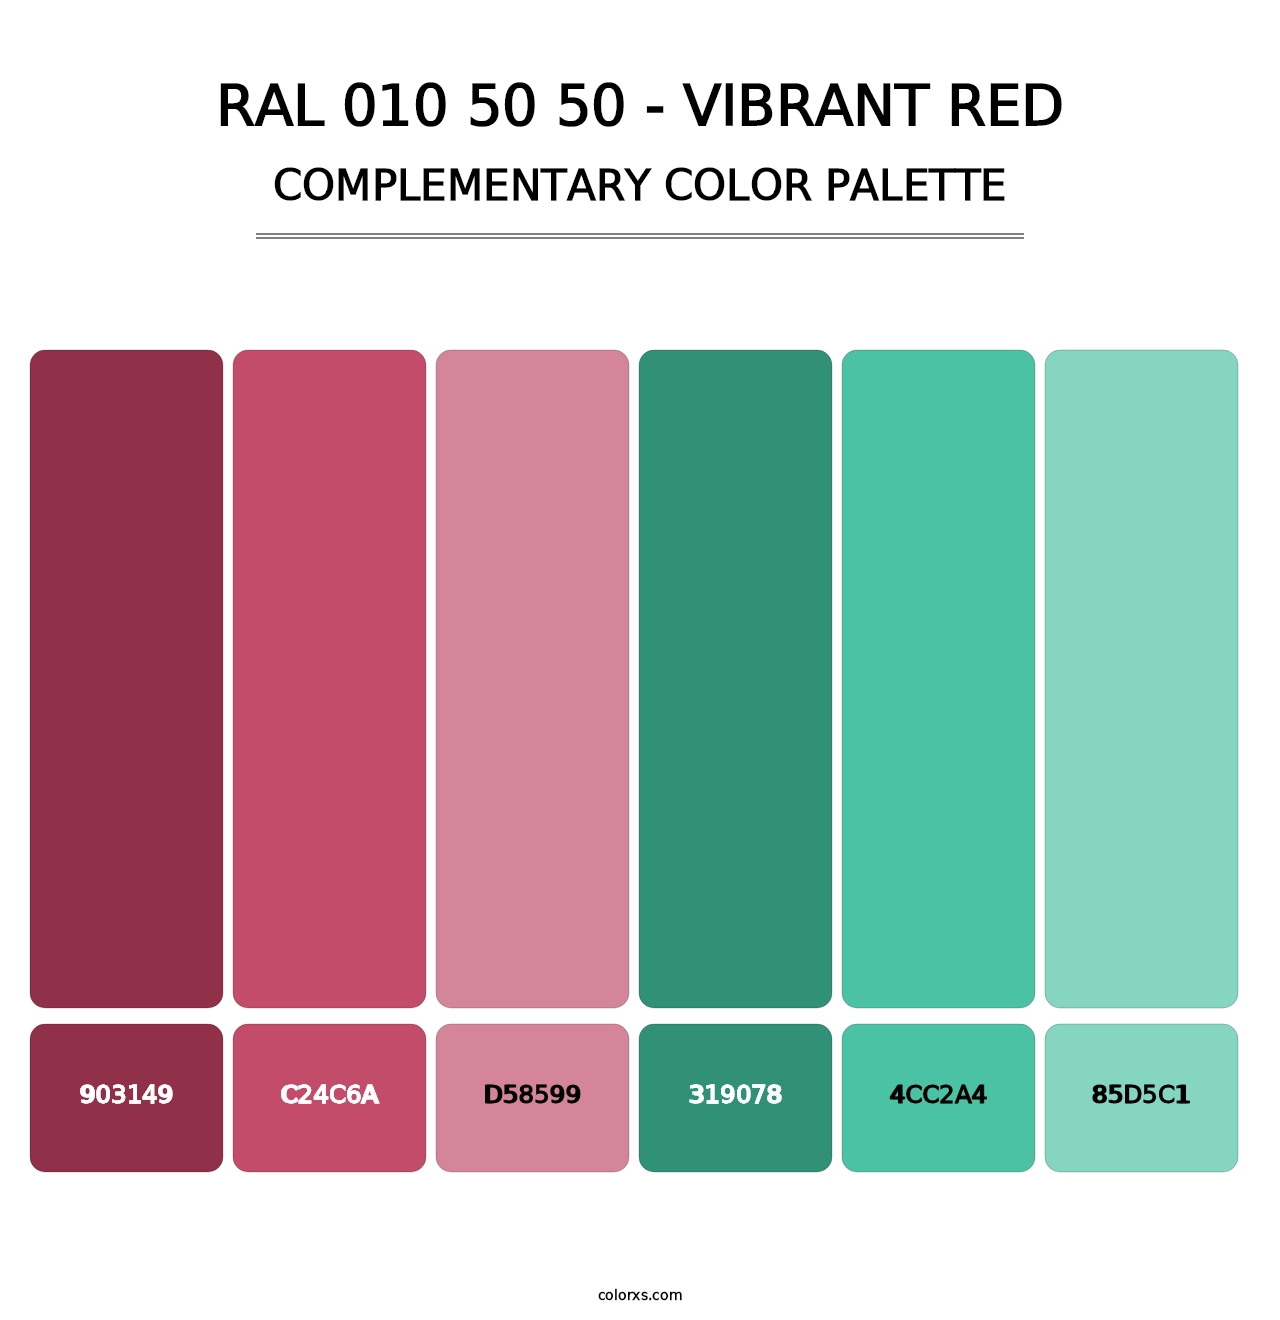 RAL 010 50 50 - Vibrant Red - Complementary Color Palette